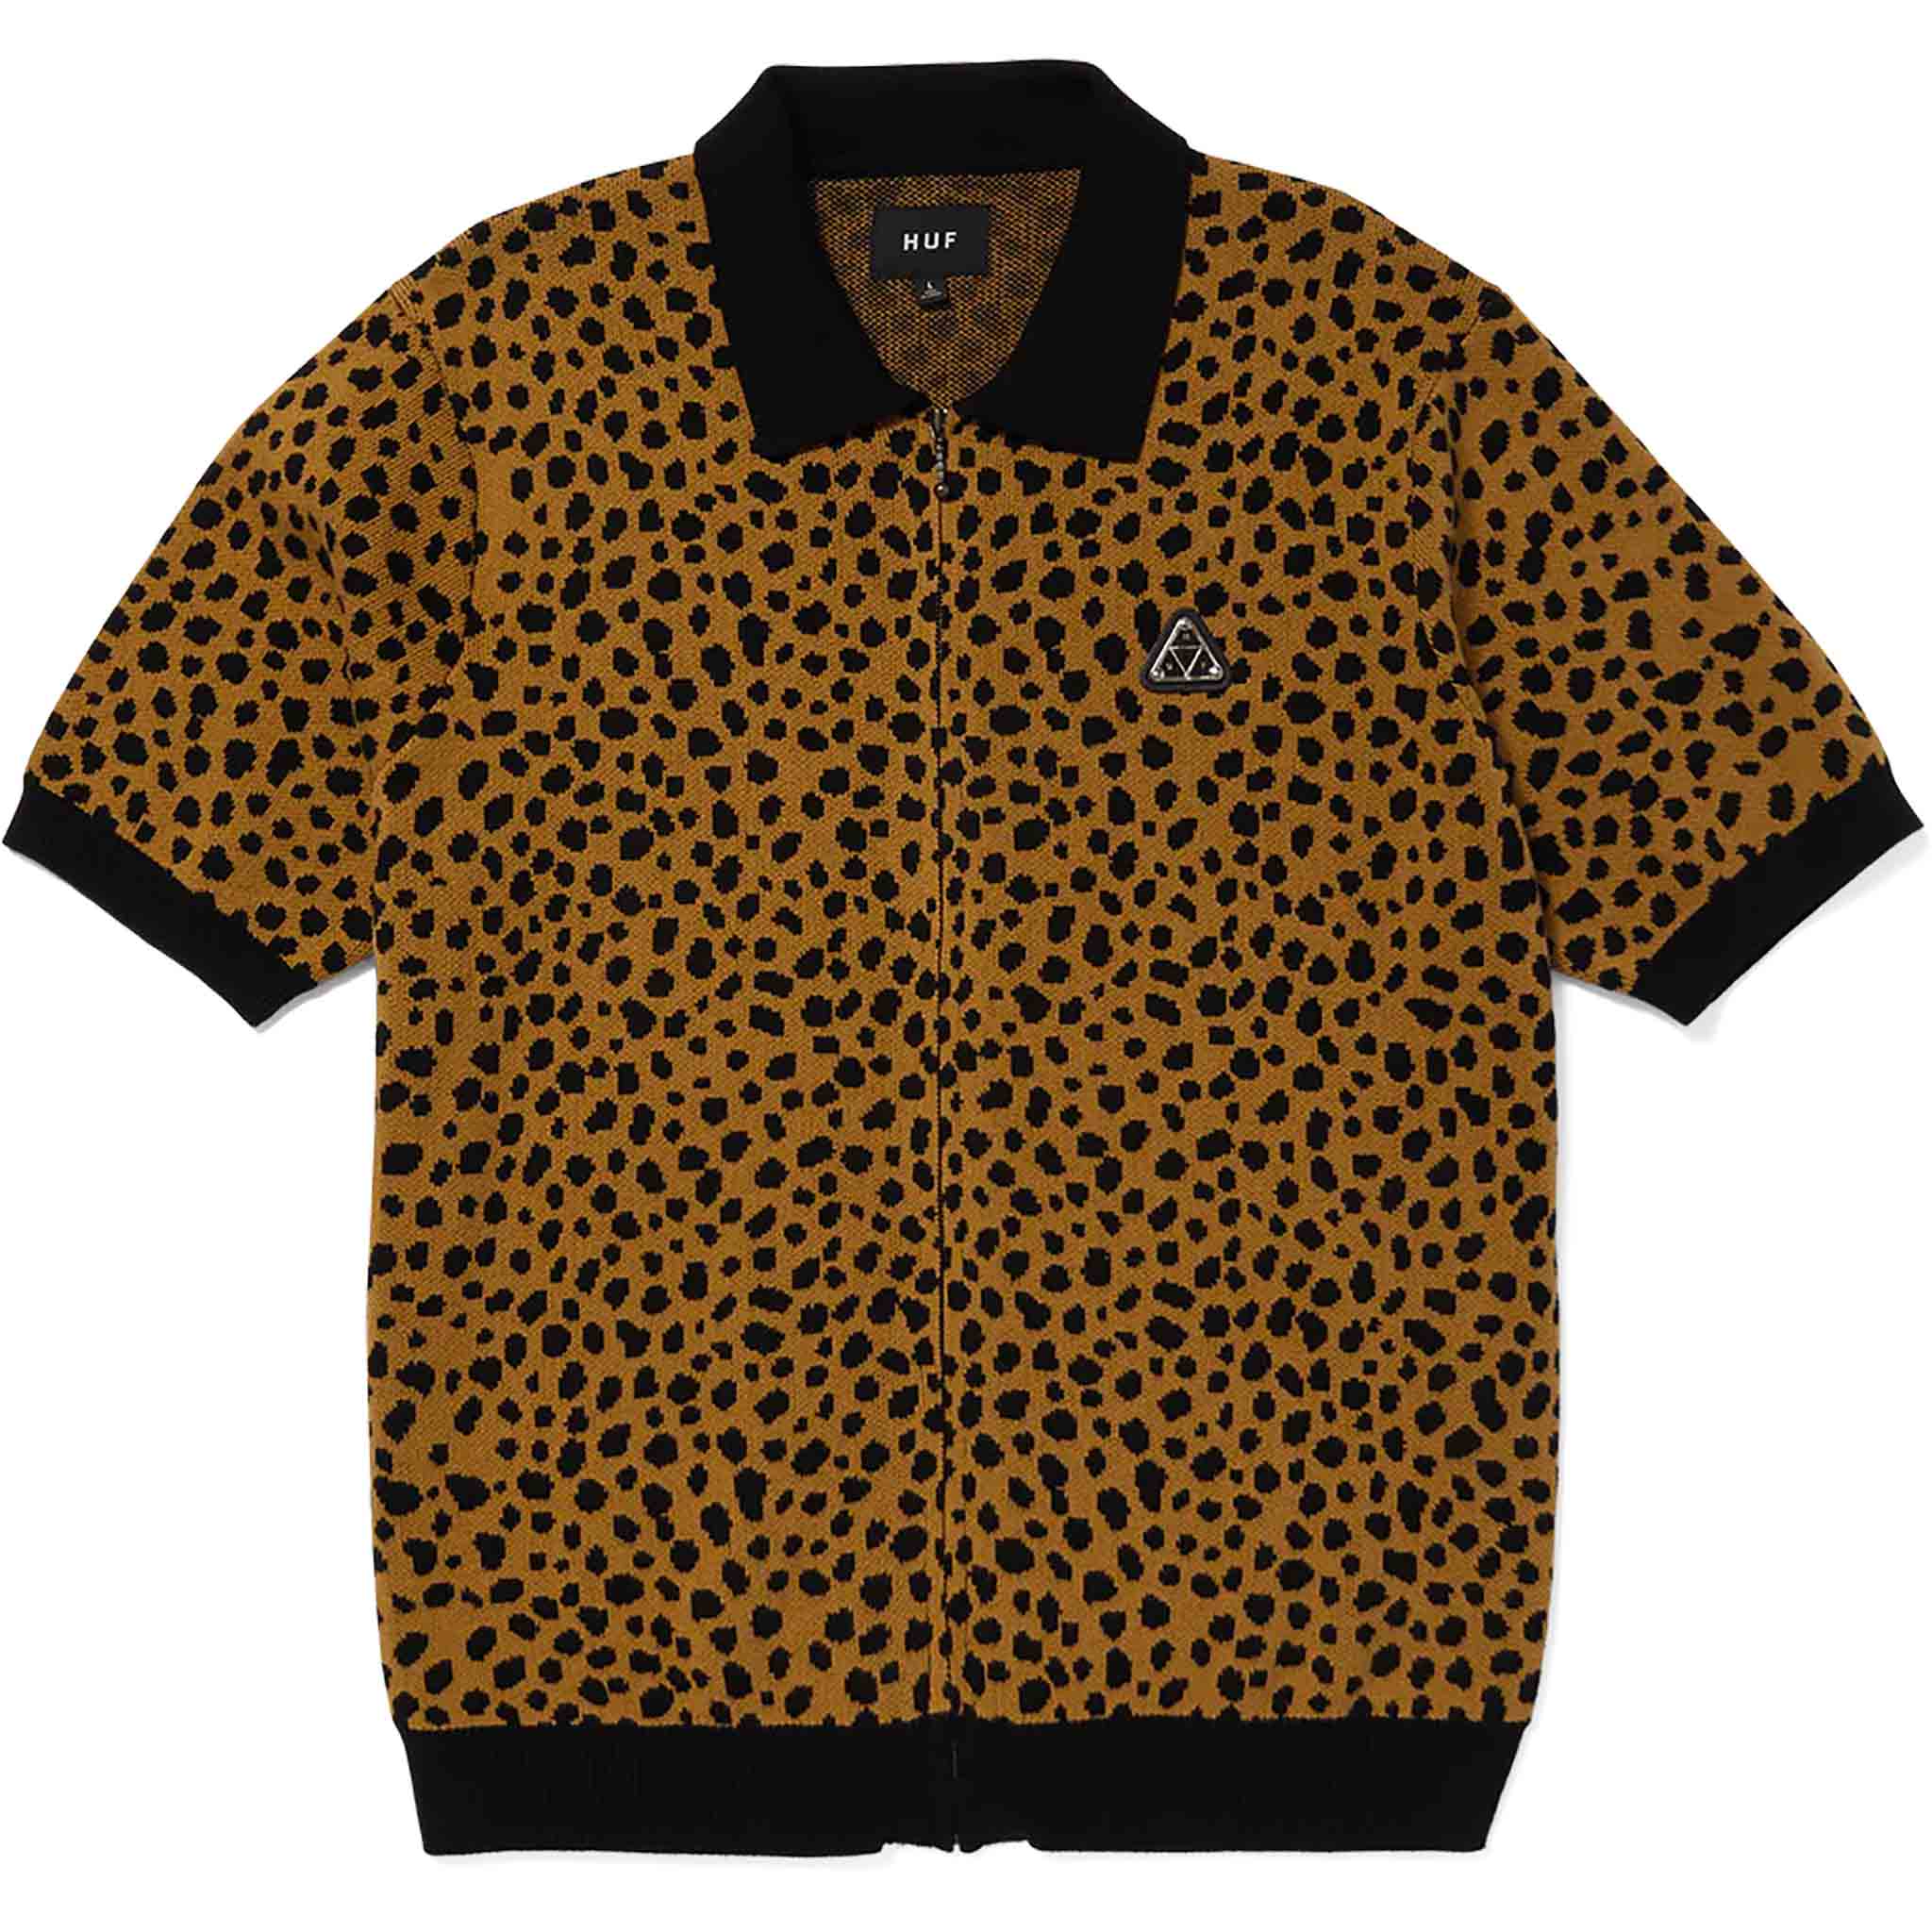 Huf Instinct Bowling Sweater Brown Button Up